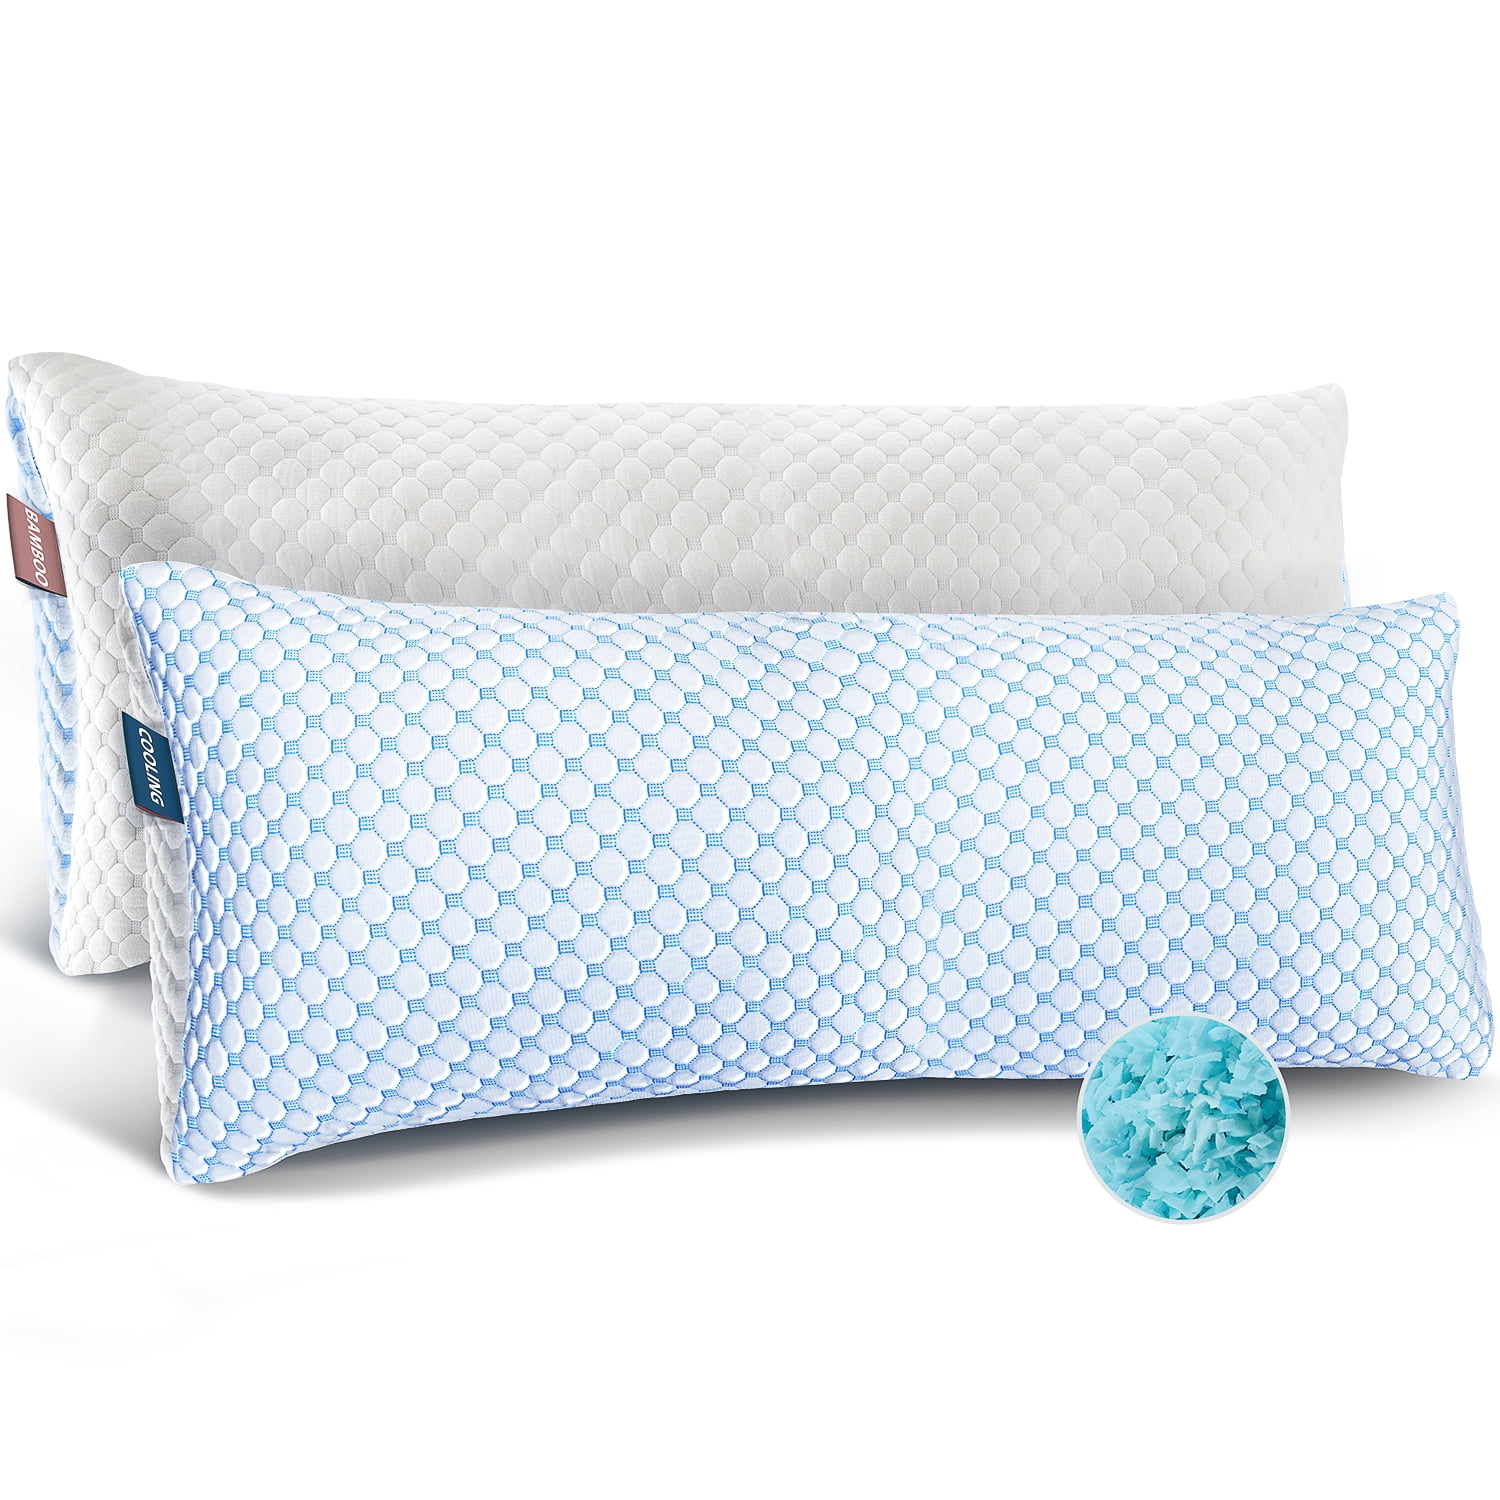 Holiday Gift Guide: Comfort Revolution Cooling Gel Pillow #giftguide